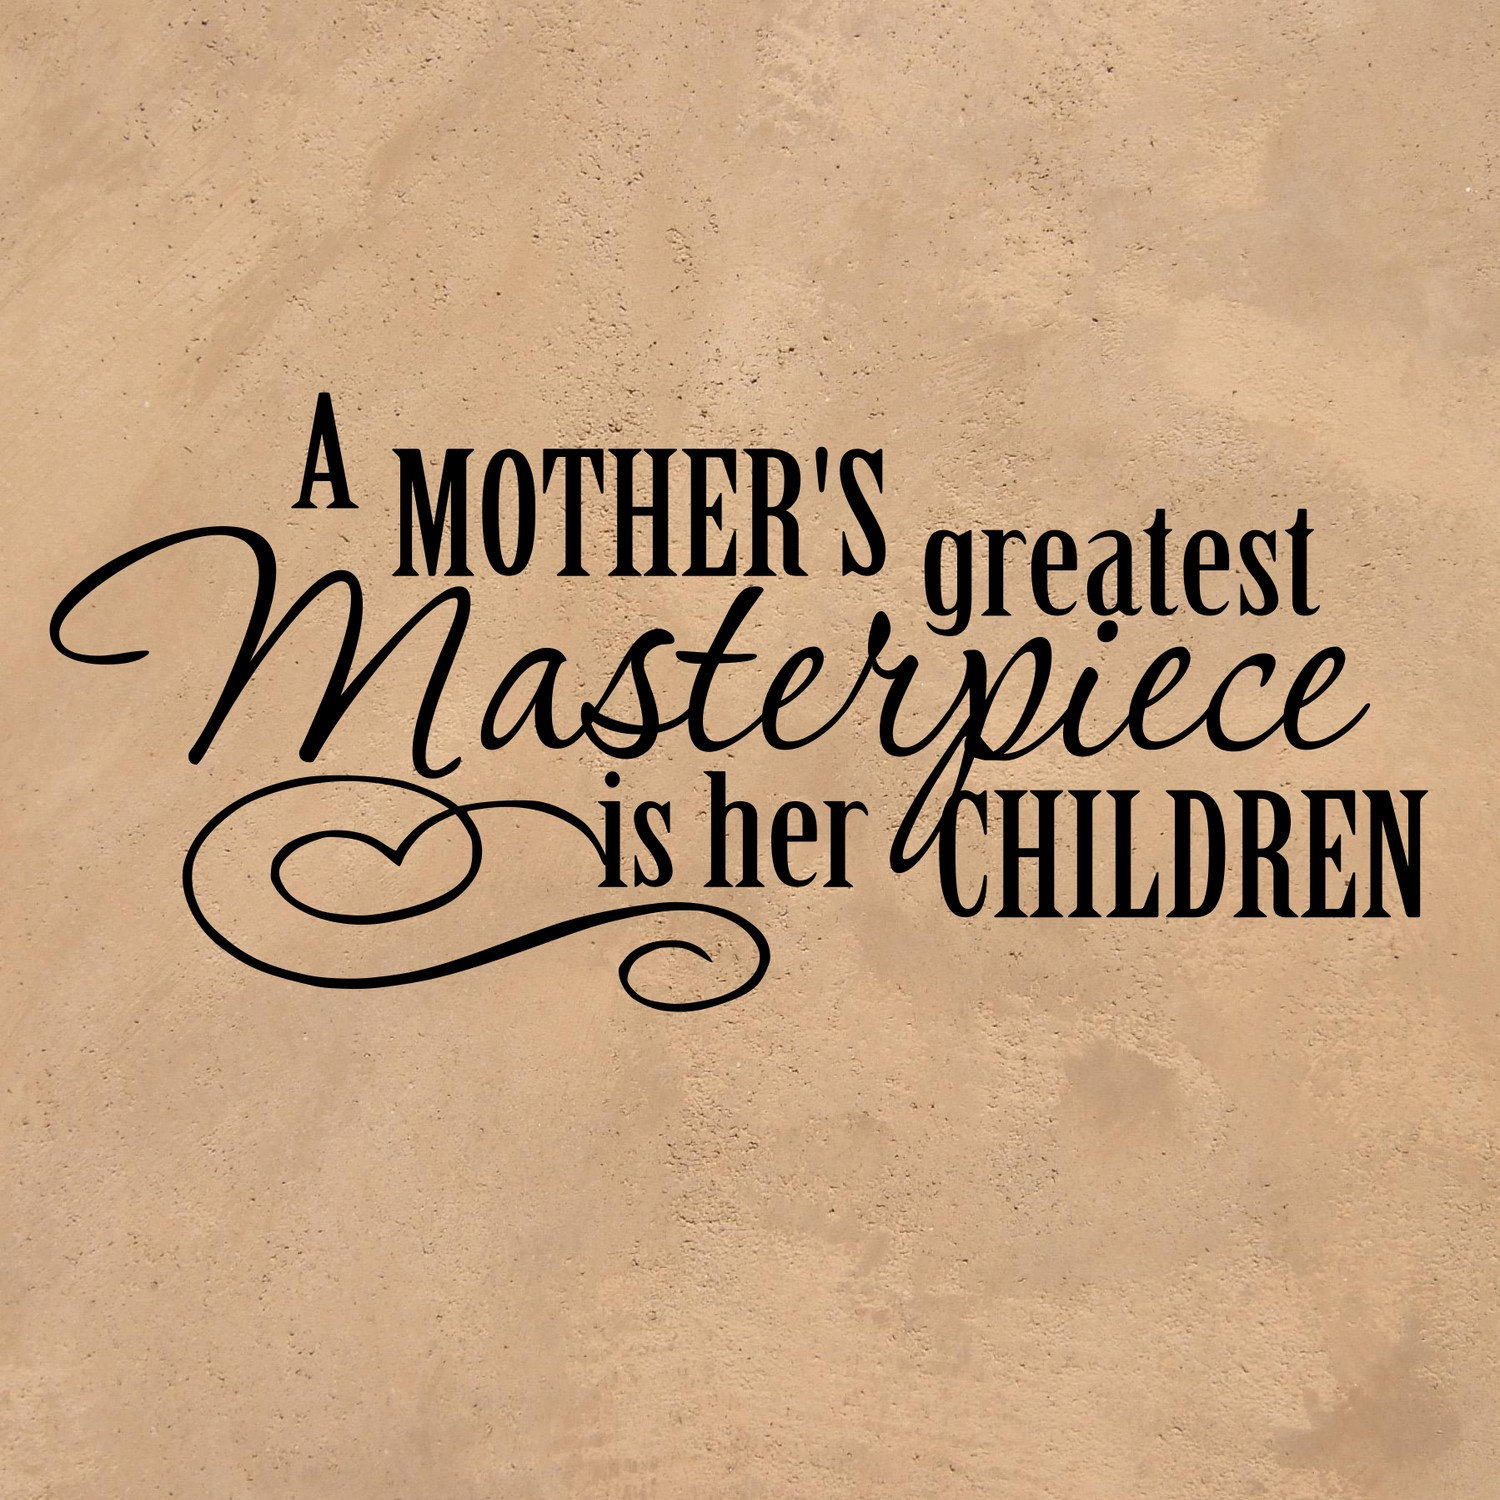 Love Quote For Child 20 Quotes About A Mother's Love For Her Child ...